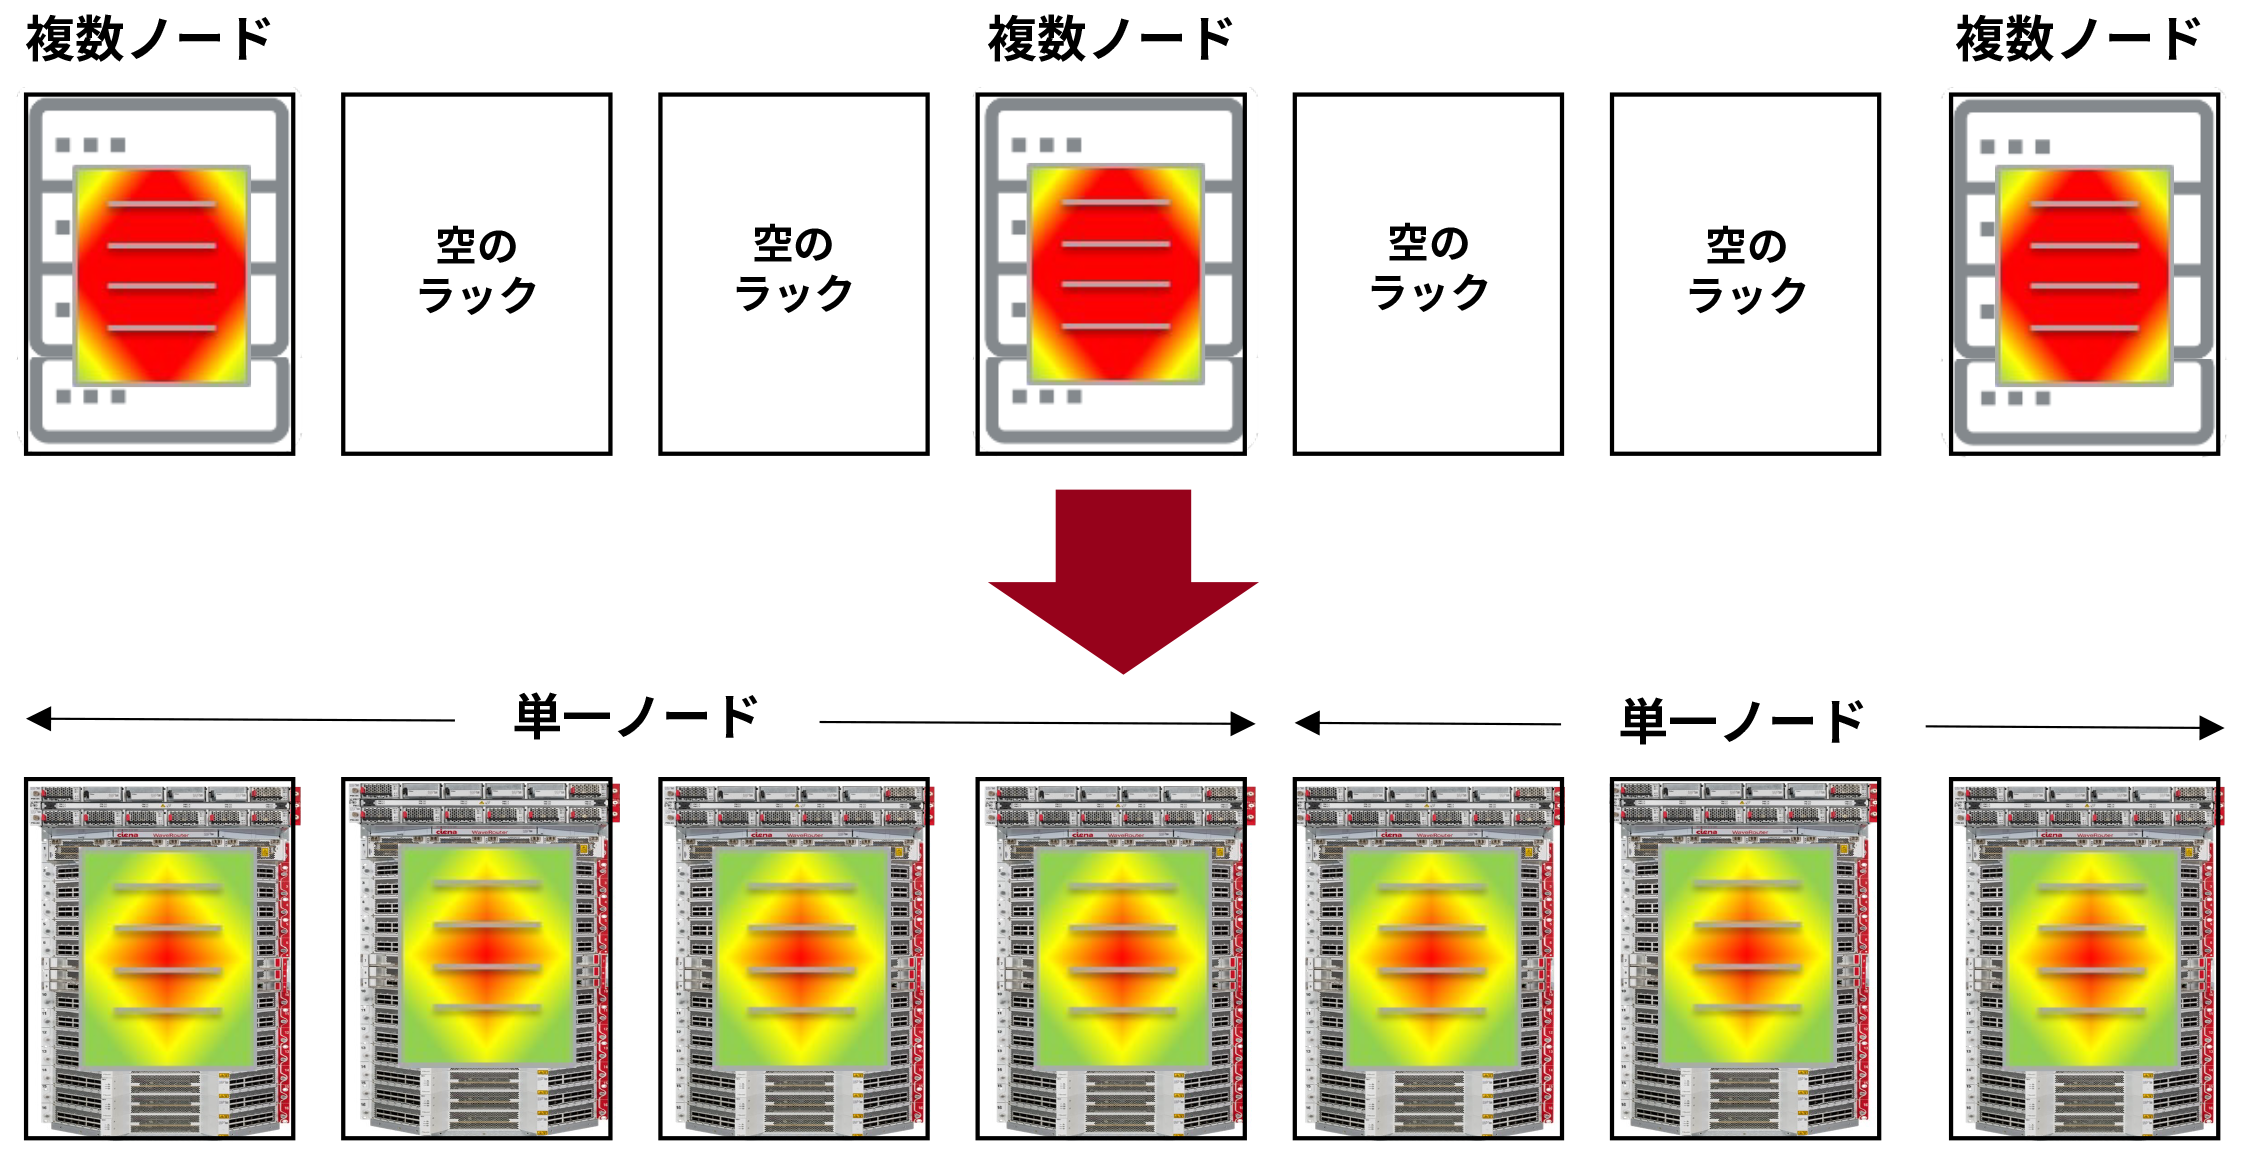 Thermal spatial density translated in Japanese